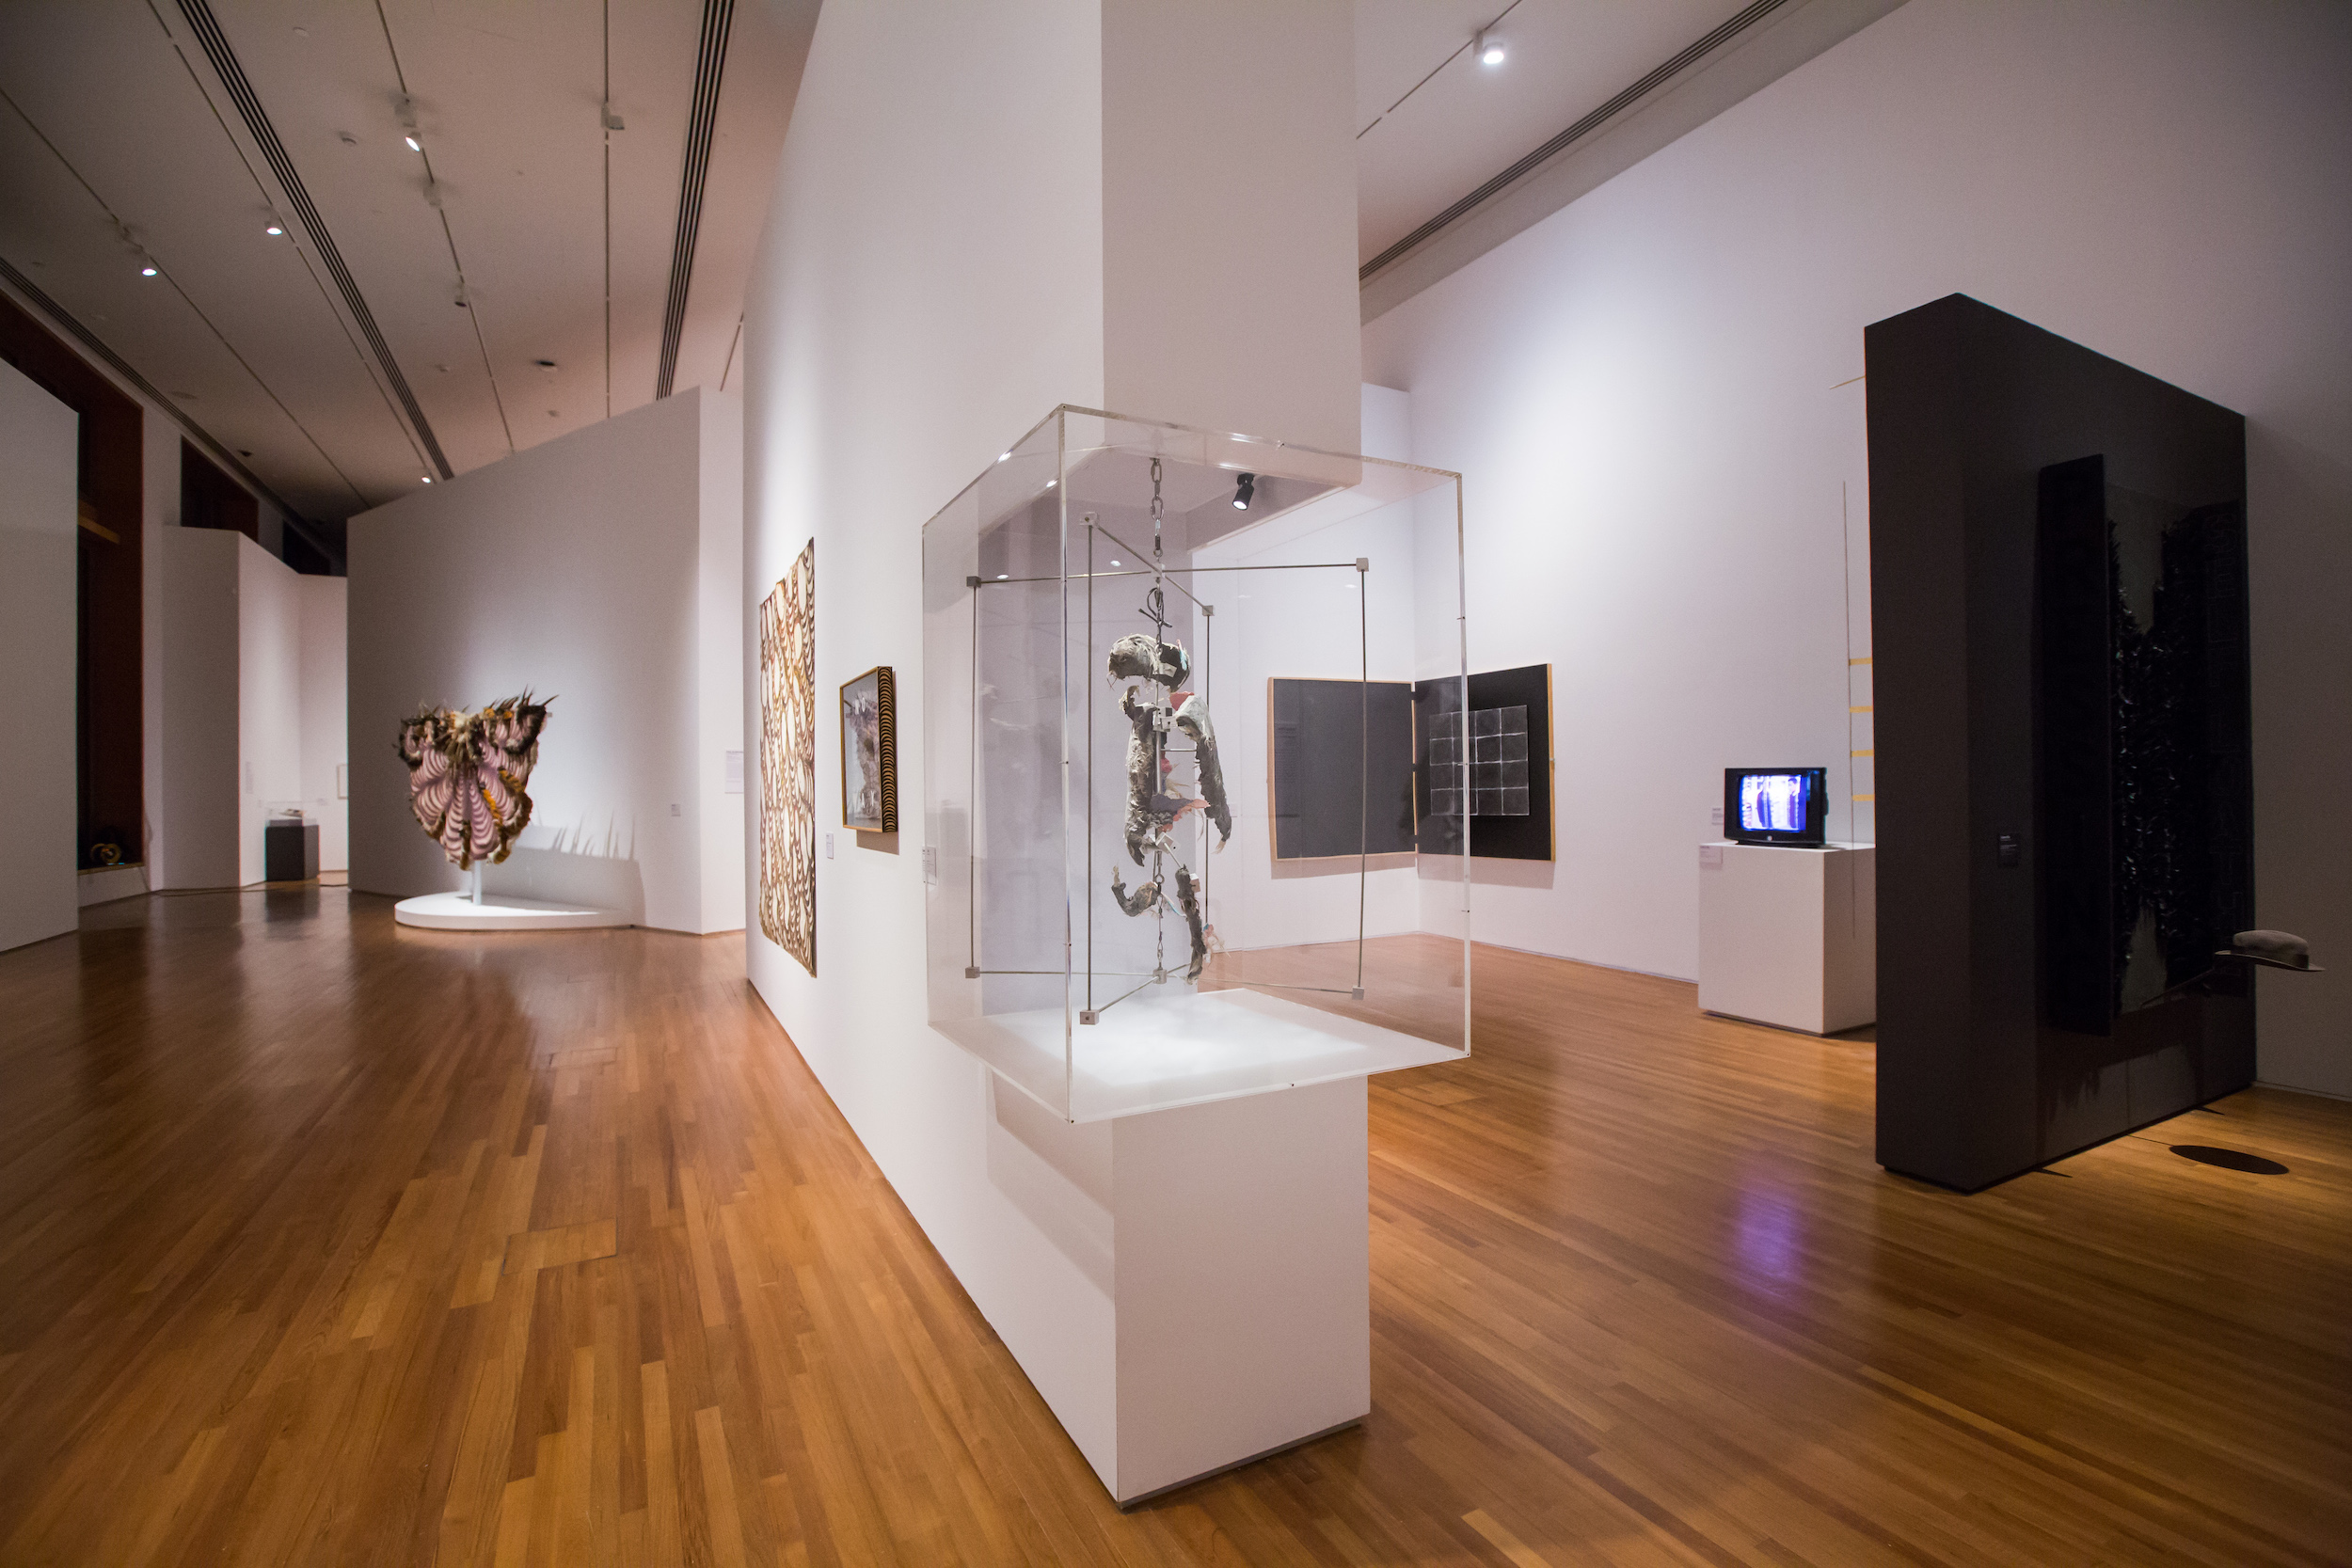 Carlos Villa, survey of works (1967–2006) presented in Singapore Biennale 2019. Image courtesy of Singapore Art Museum.